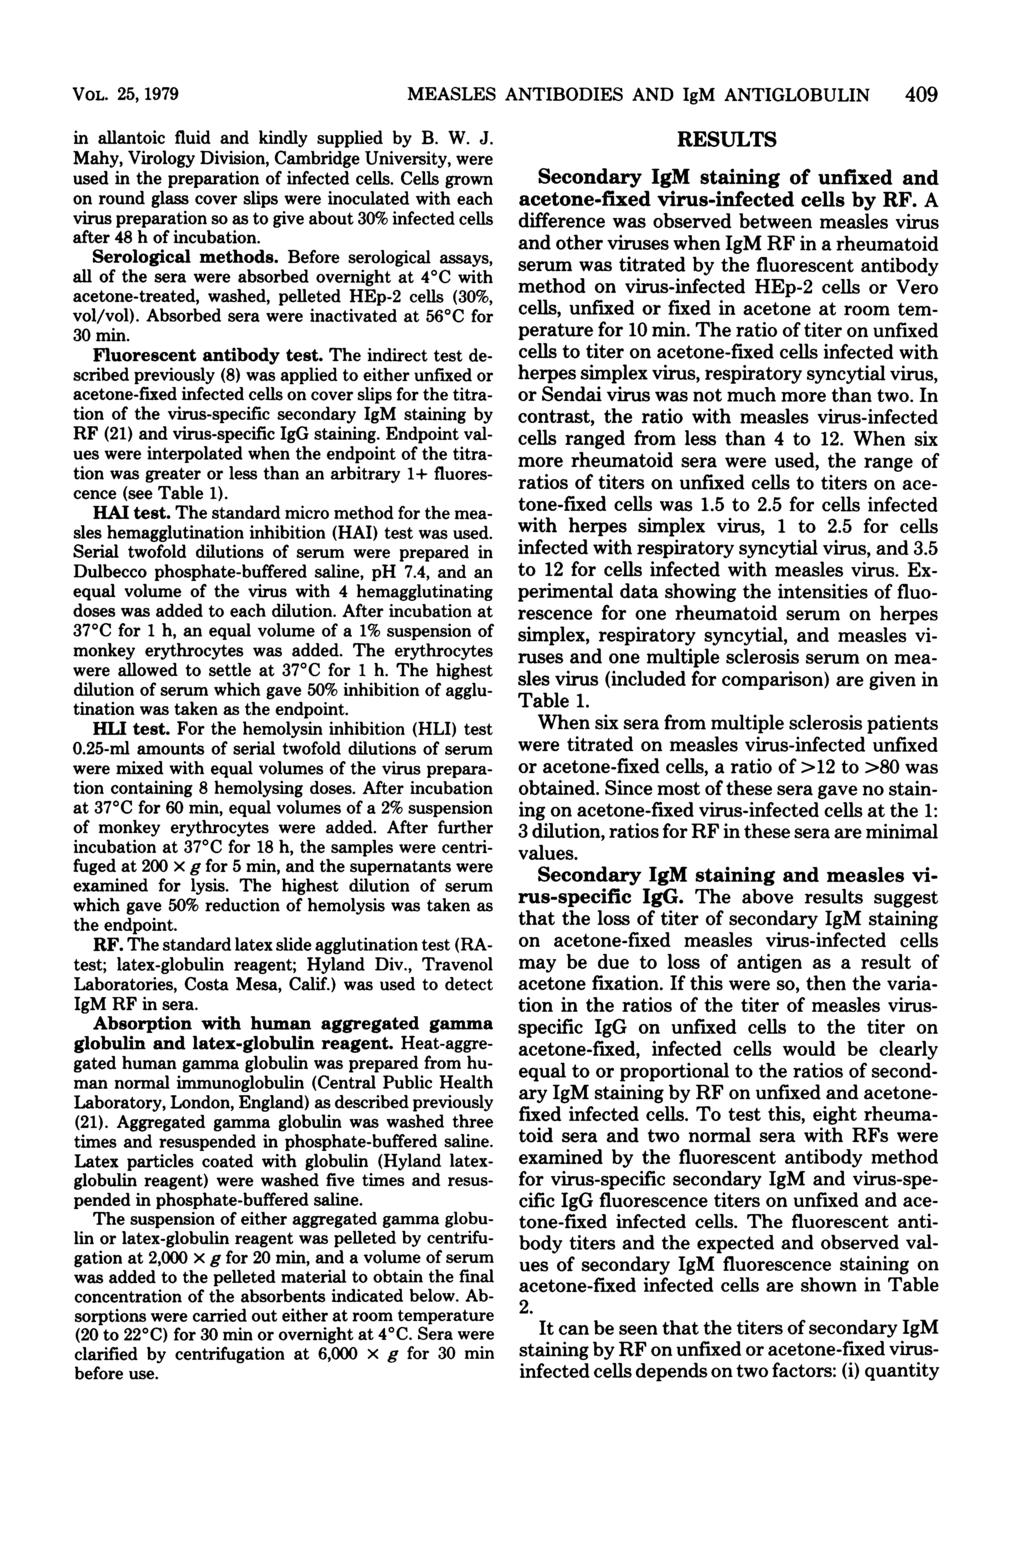 VOL. 25, 1979 in allantoic fluid and kindly supplied by B. W. J. Mahy, Virology Division, Cambridge University, were used in the preparation of infected.